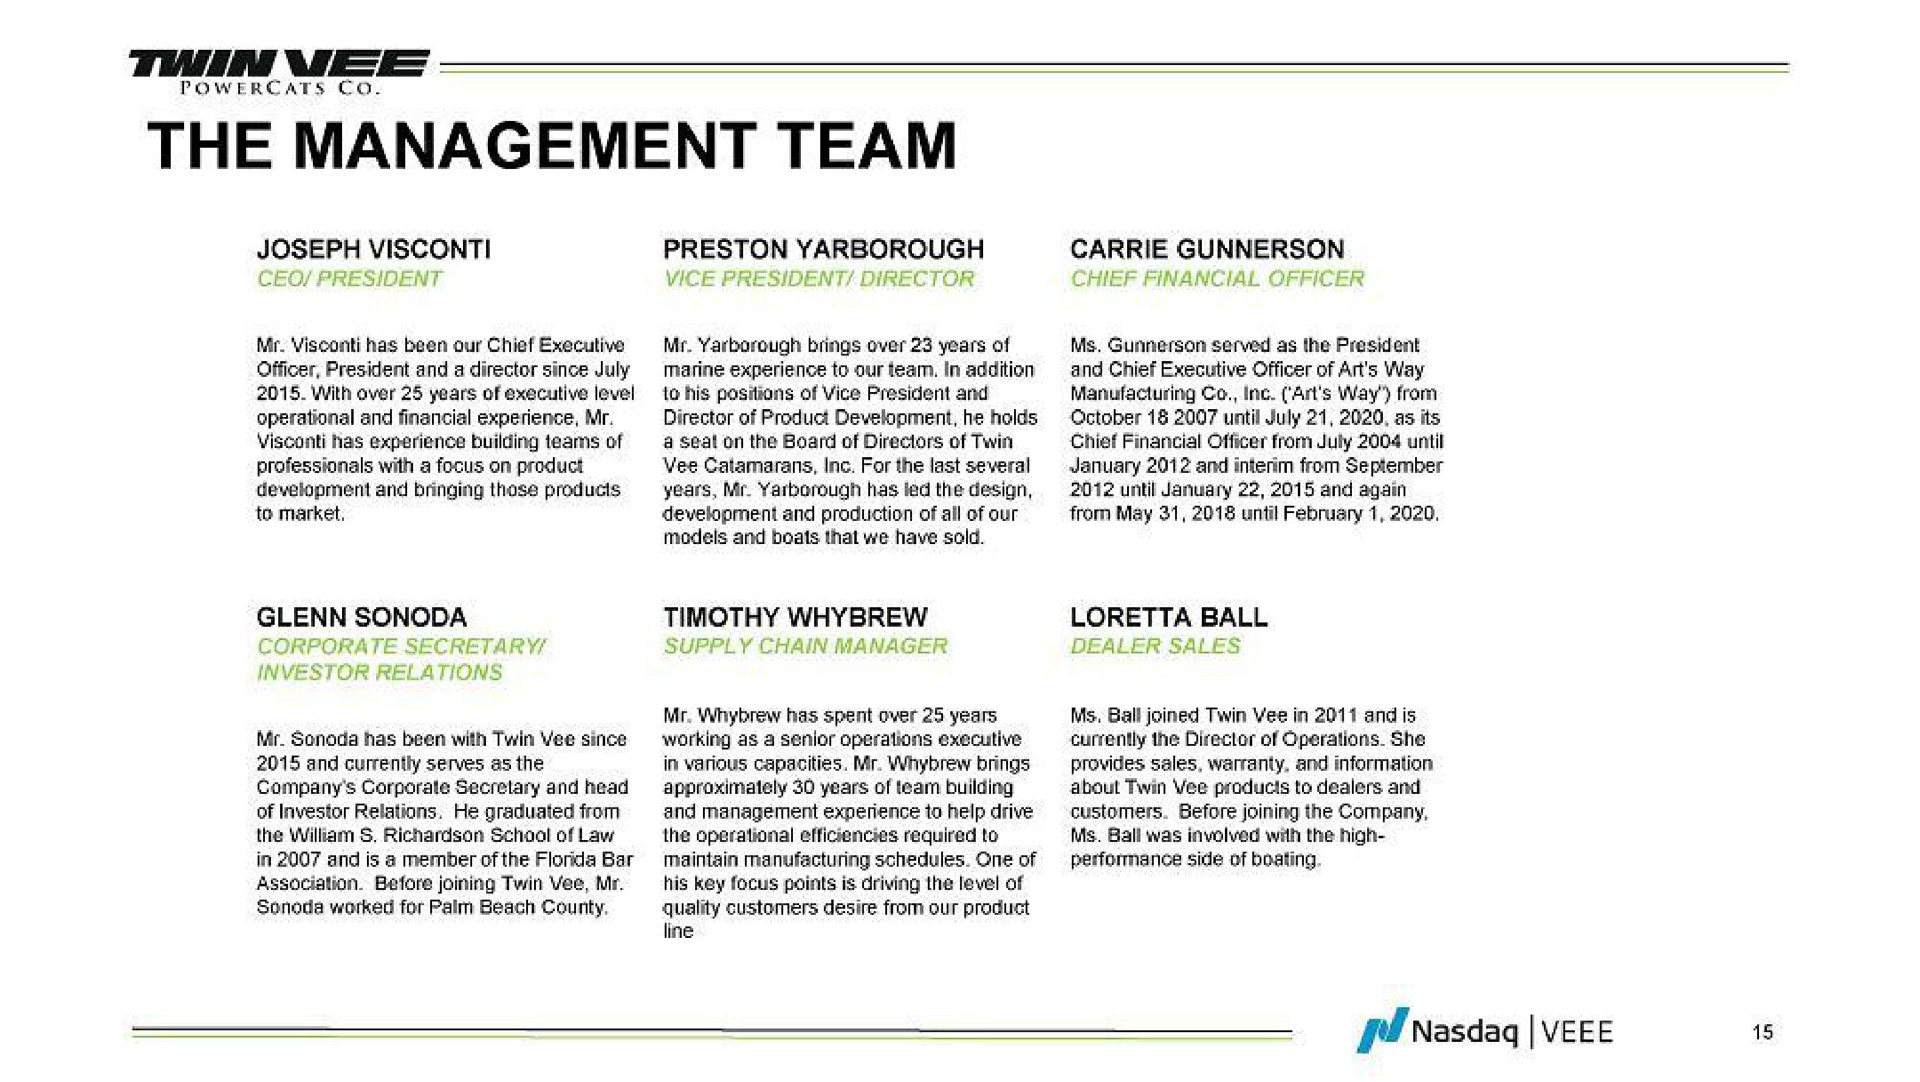 the management team | Twin Vee PowerCats